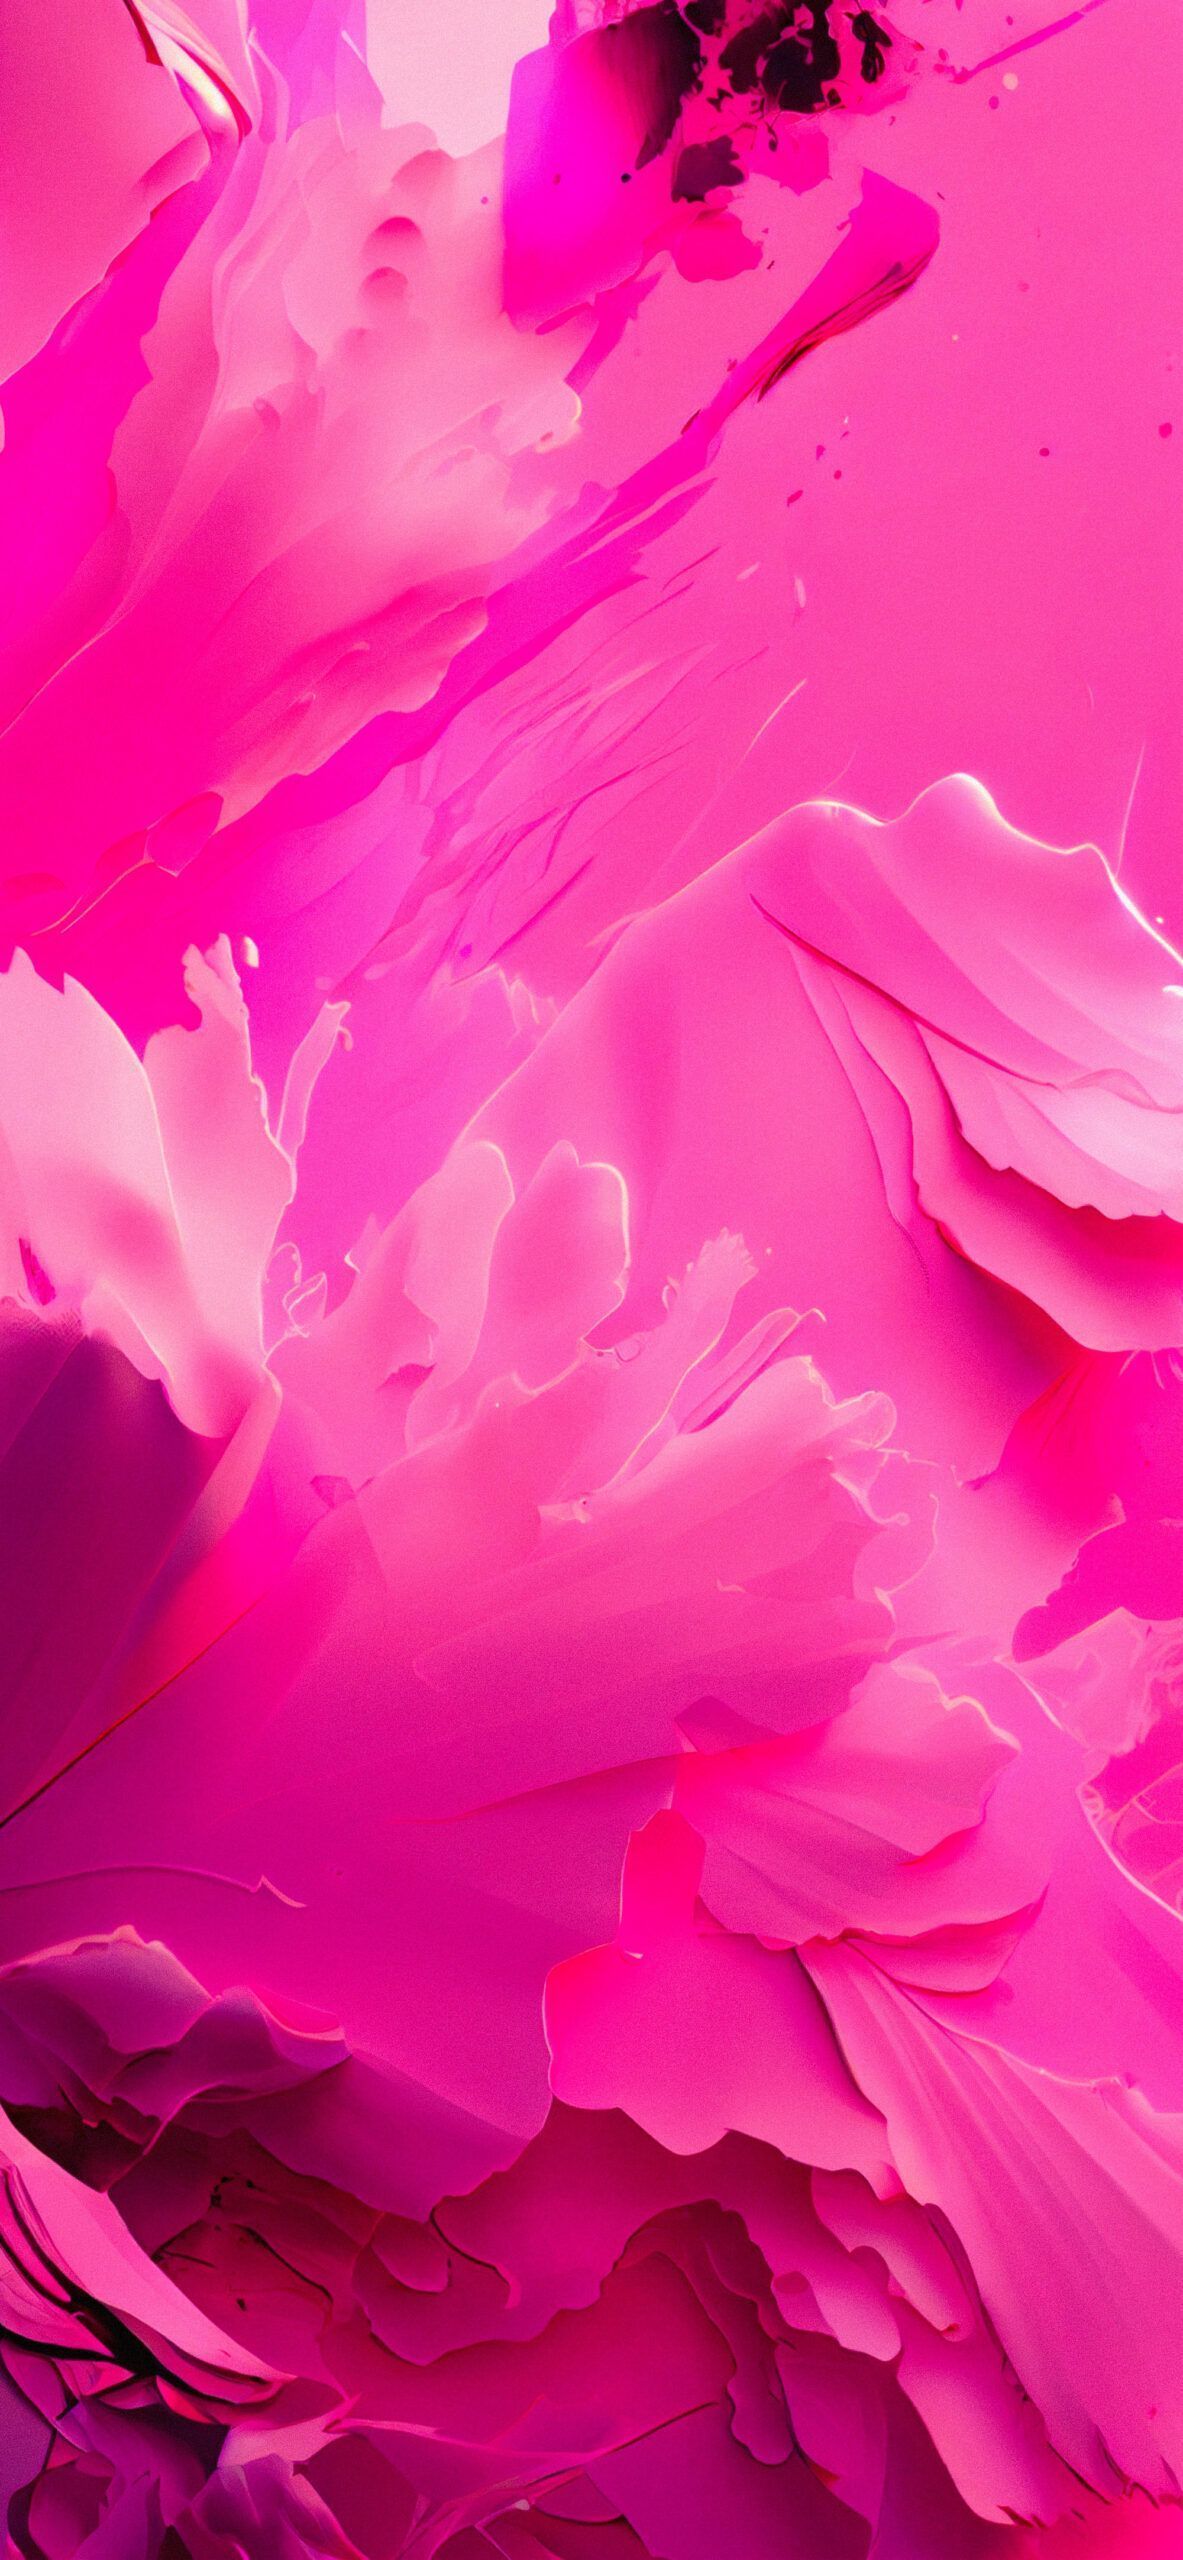 A close up of some pink paint - Hot pink, abstract